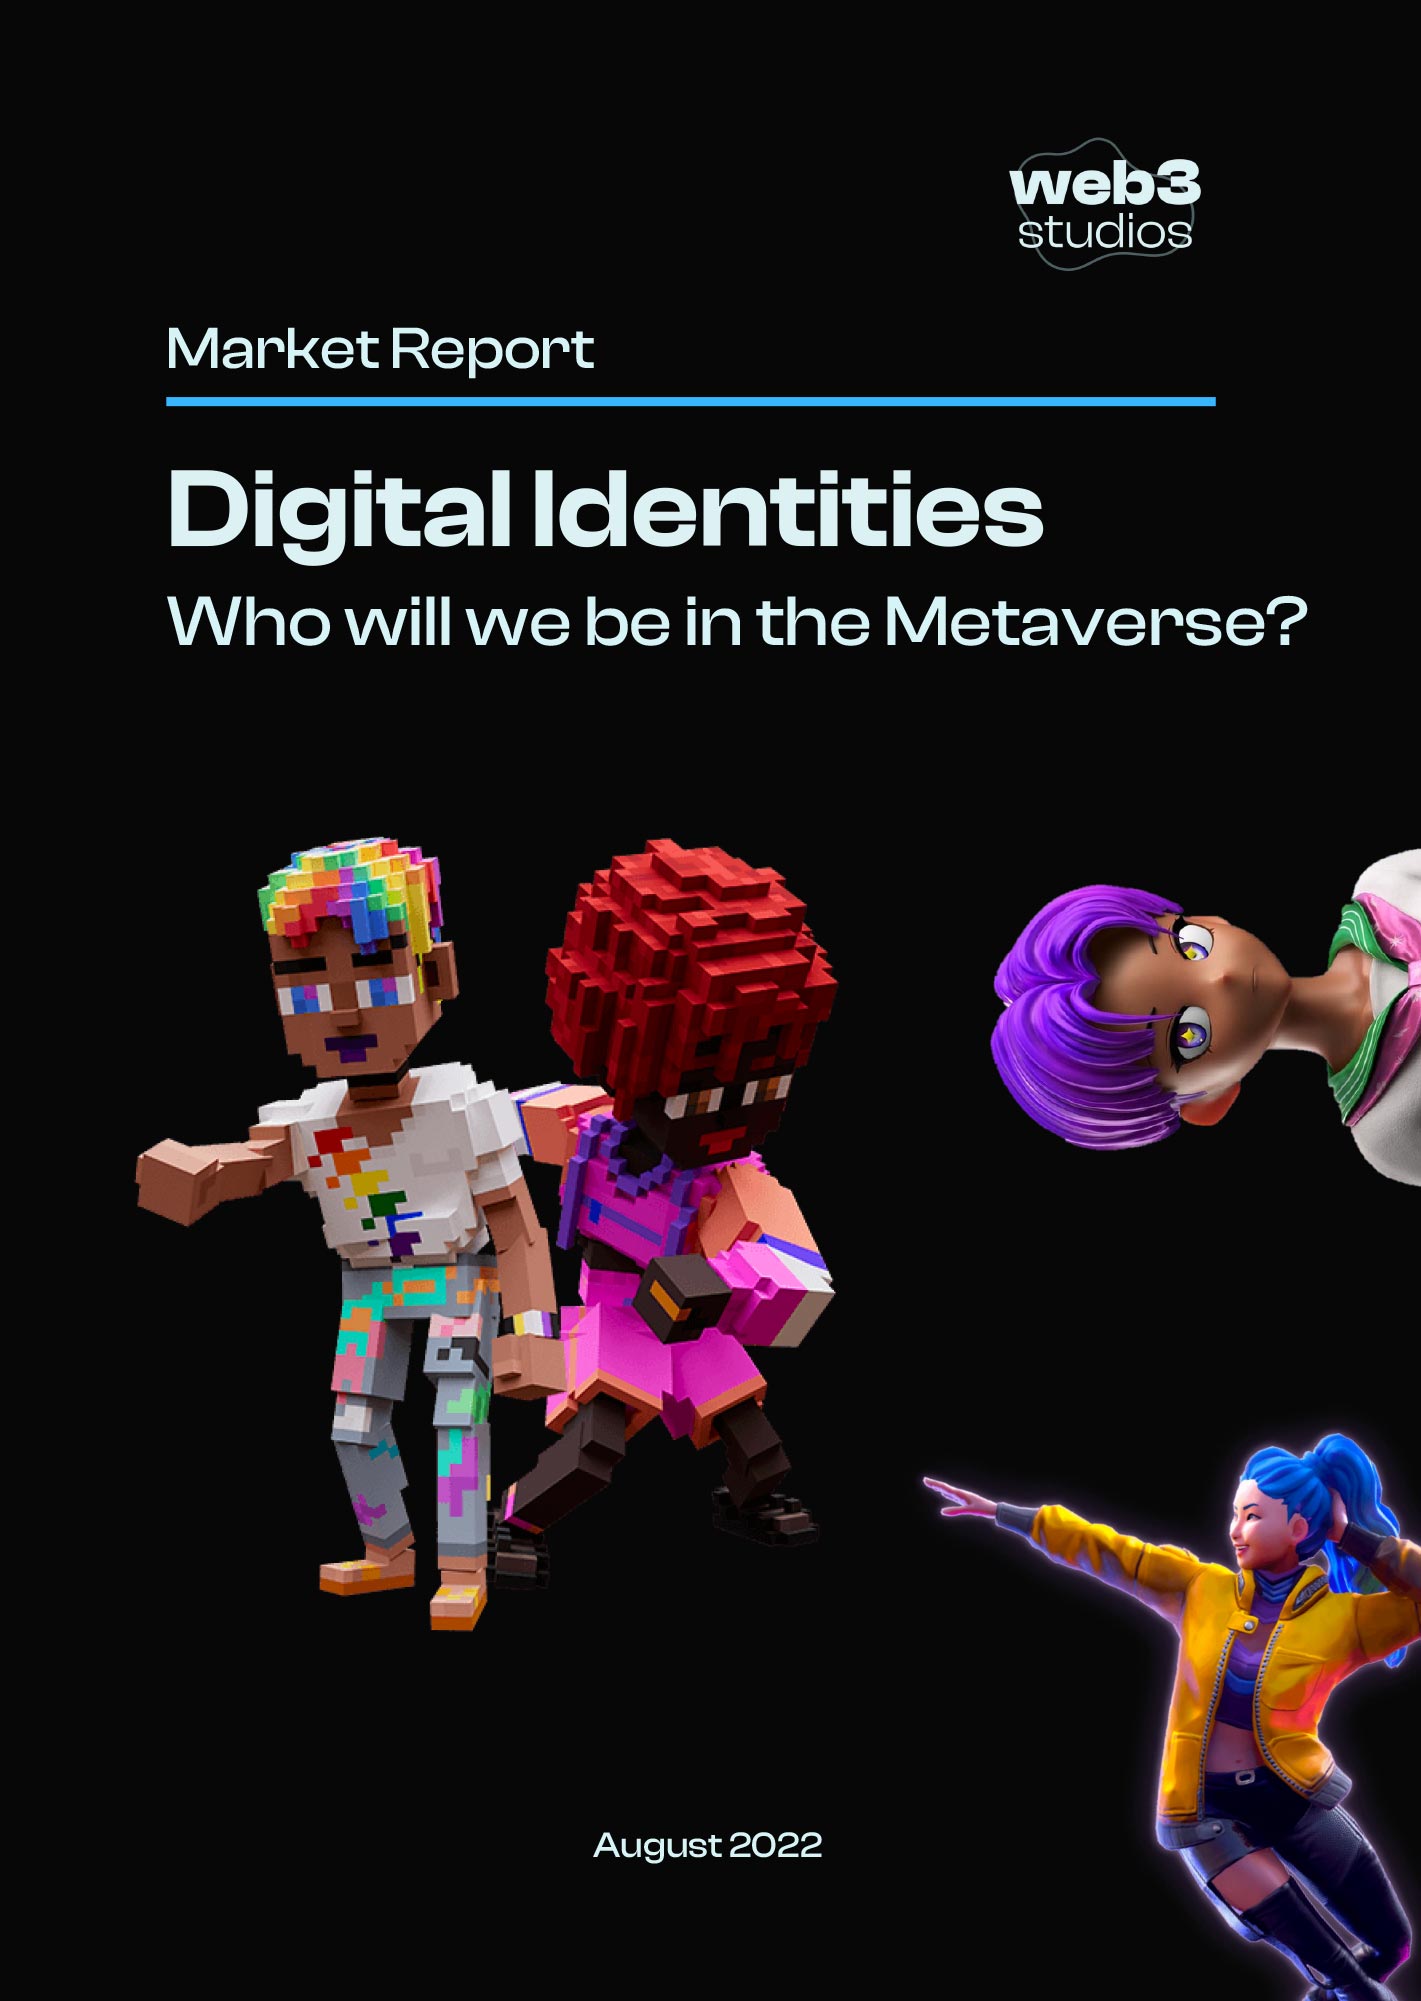 Digital Identities - Who will we be in the Metaverse